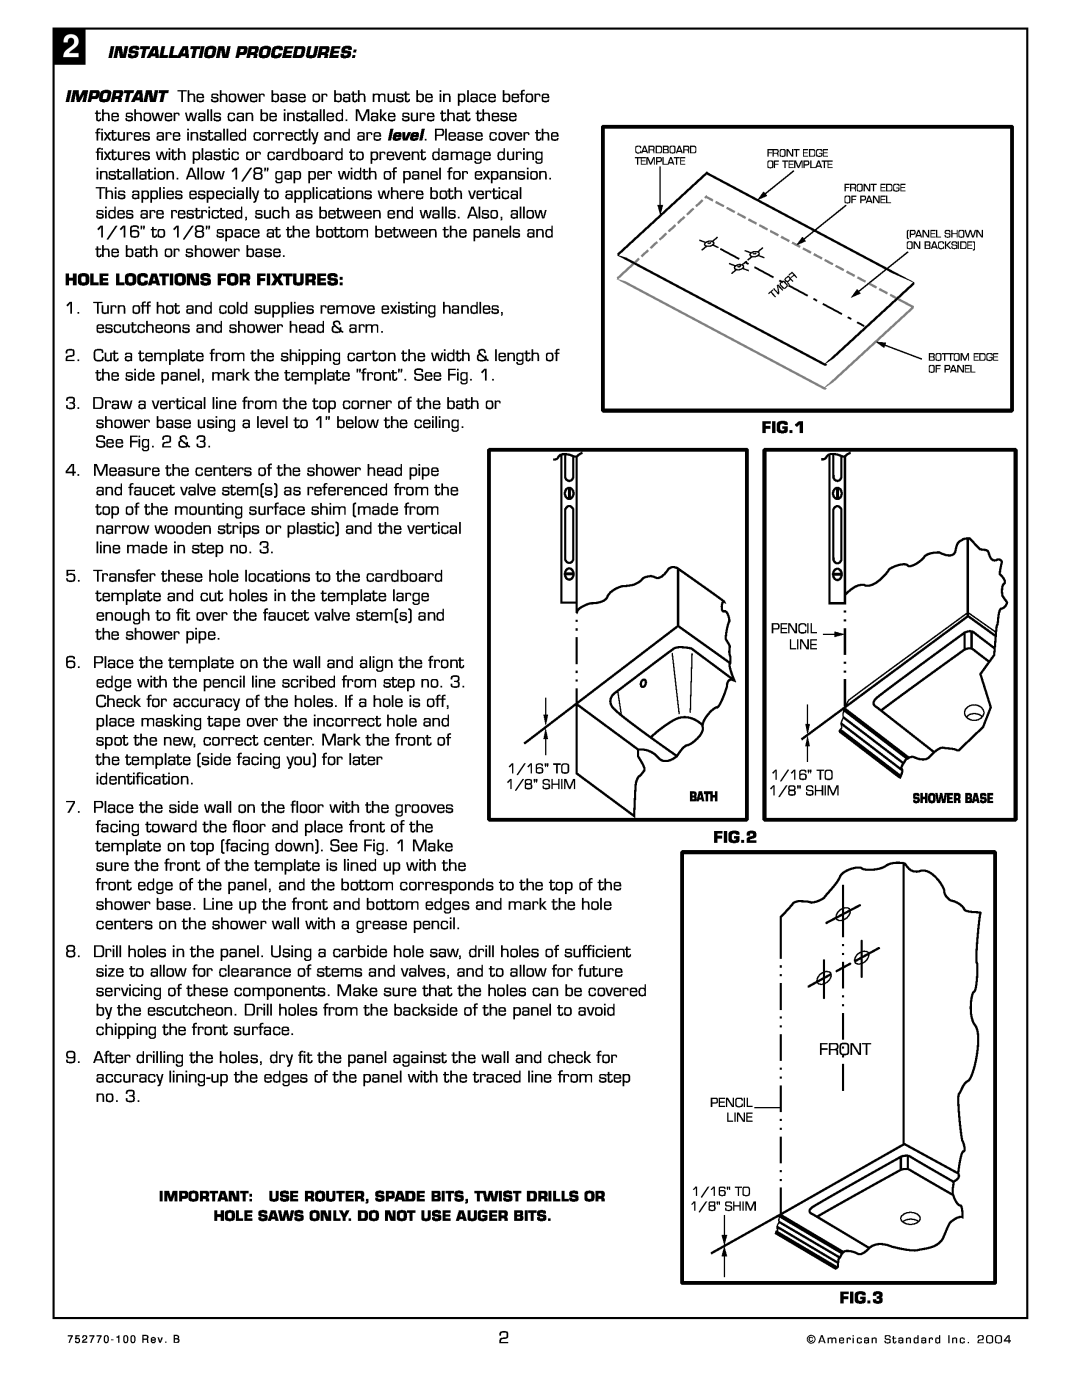 American Standard 4834.SWTS, 3636.SWTS, 6042.BWTS, 3838.CWTS Installation Procedures, Hole Locations For Fixtures 